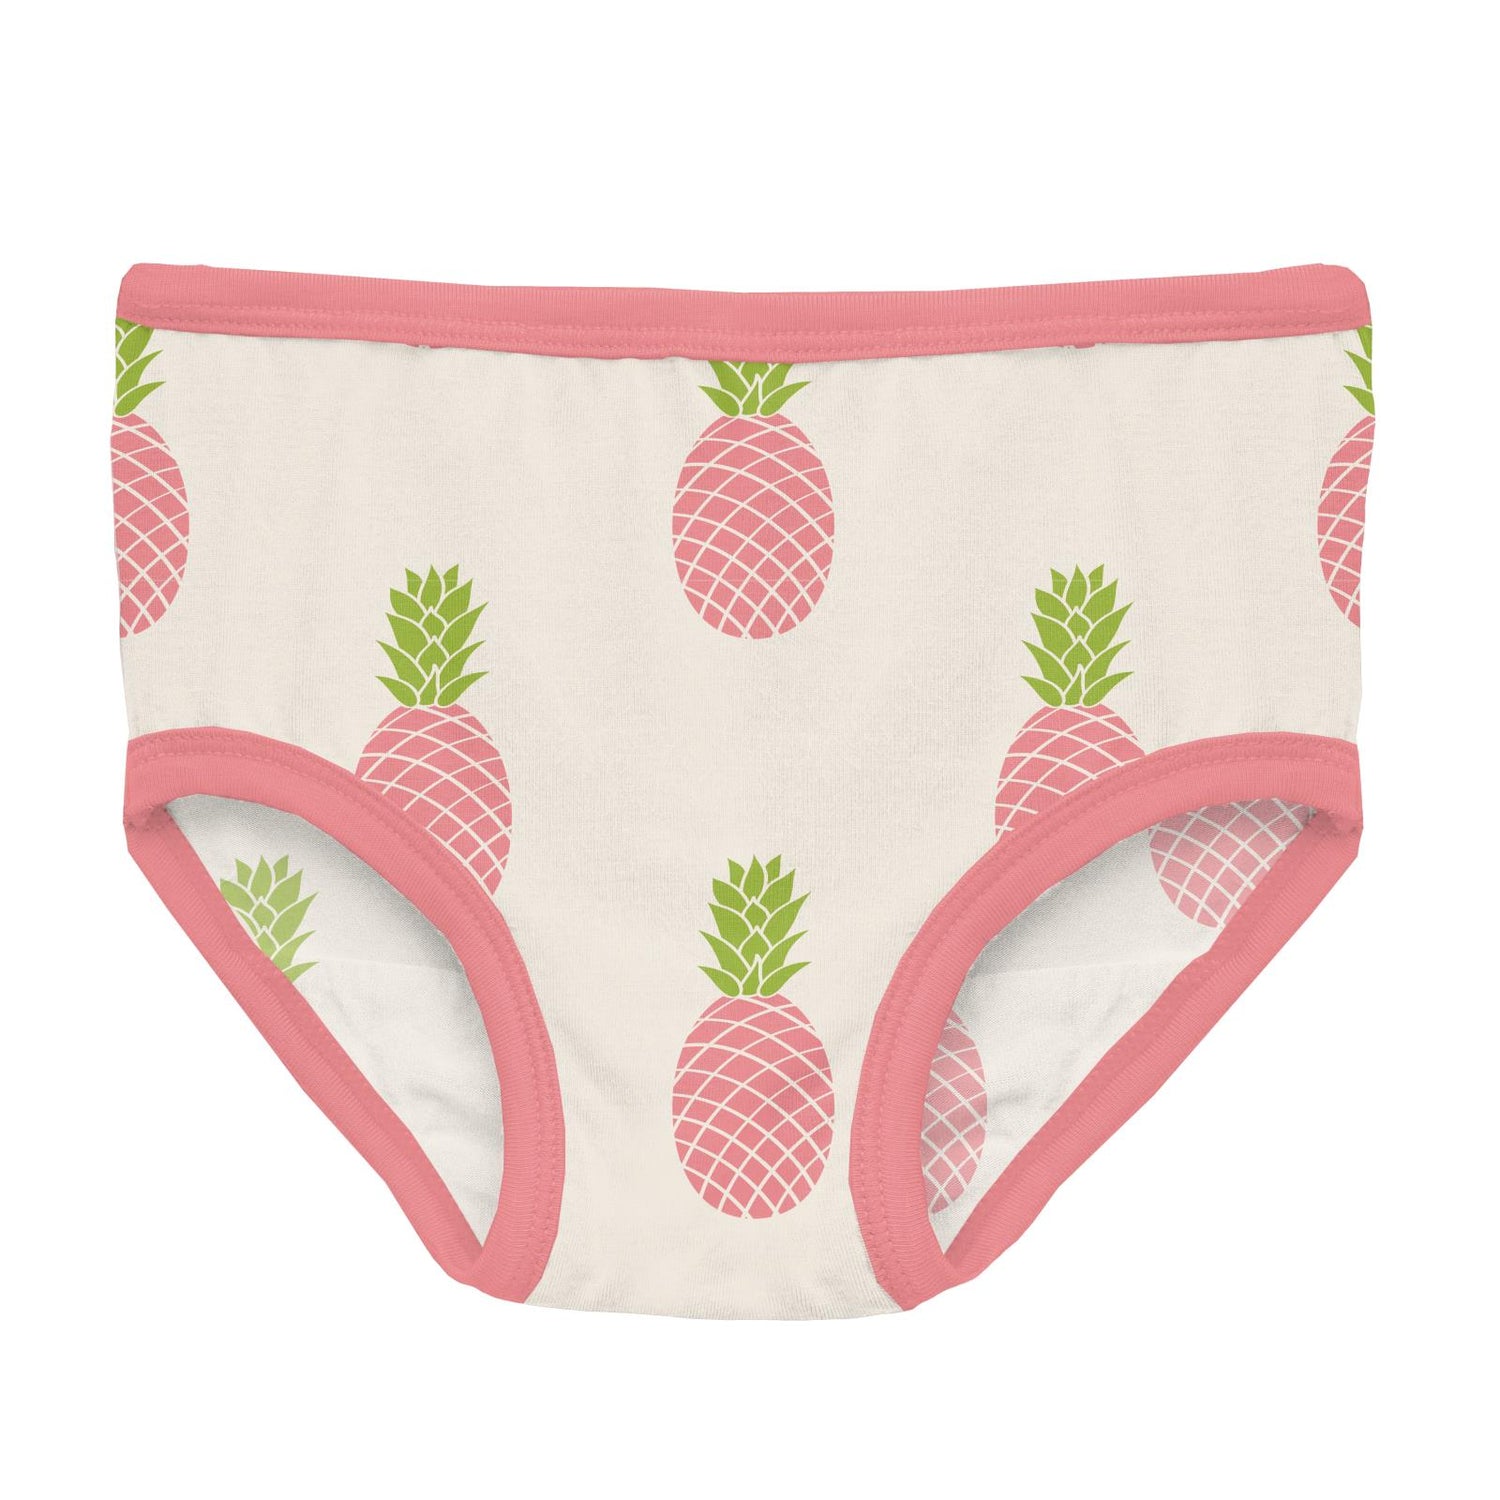 Print Underwear Set of 3 in Strawberry Pineapples, Strawberry and Strawberry Plumeria